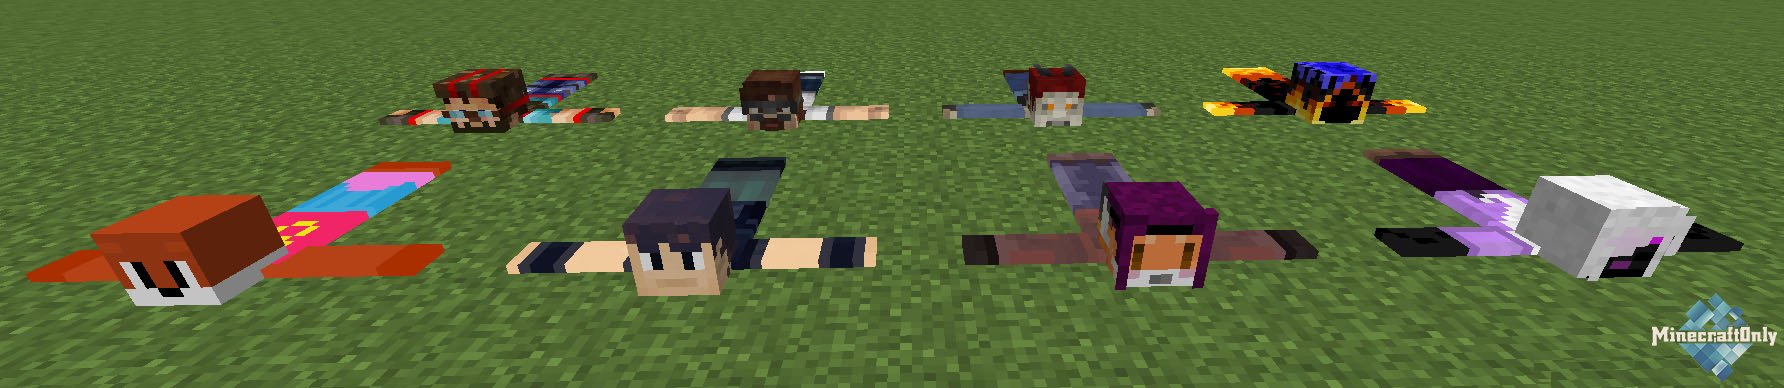 Player Rugs [1.7.10]